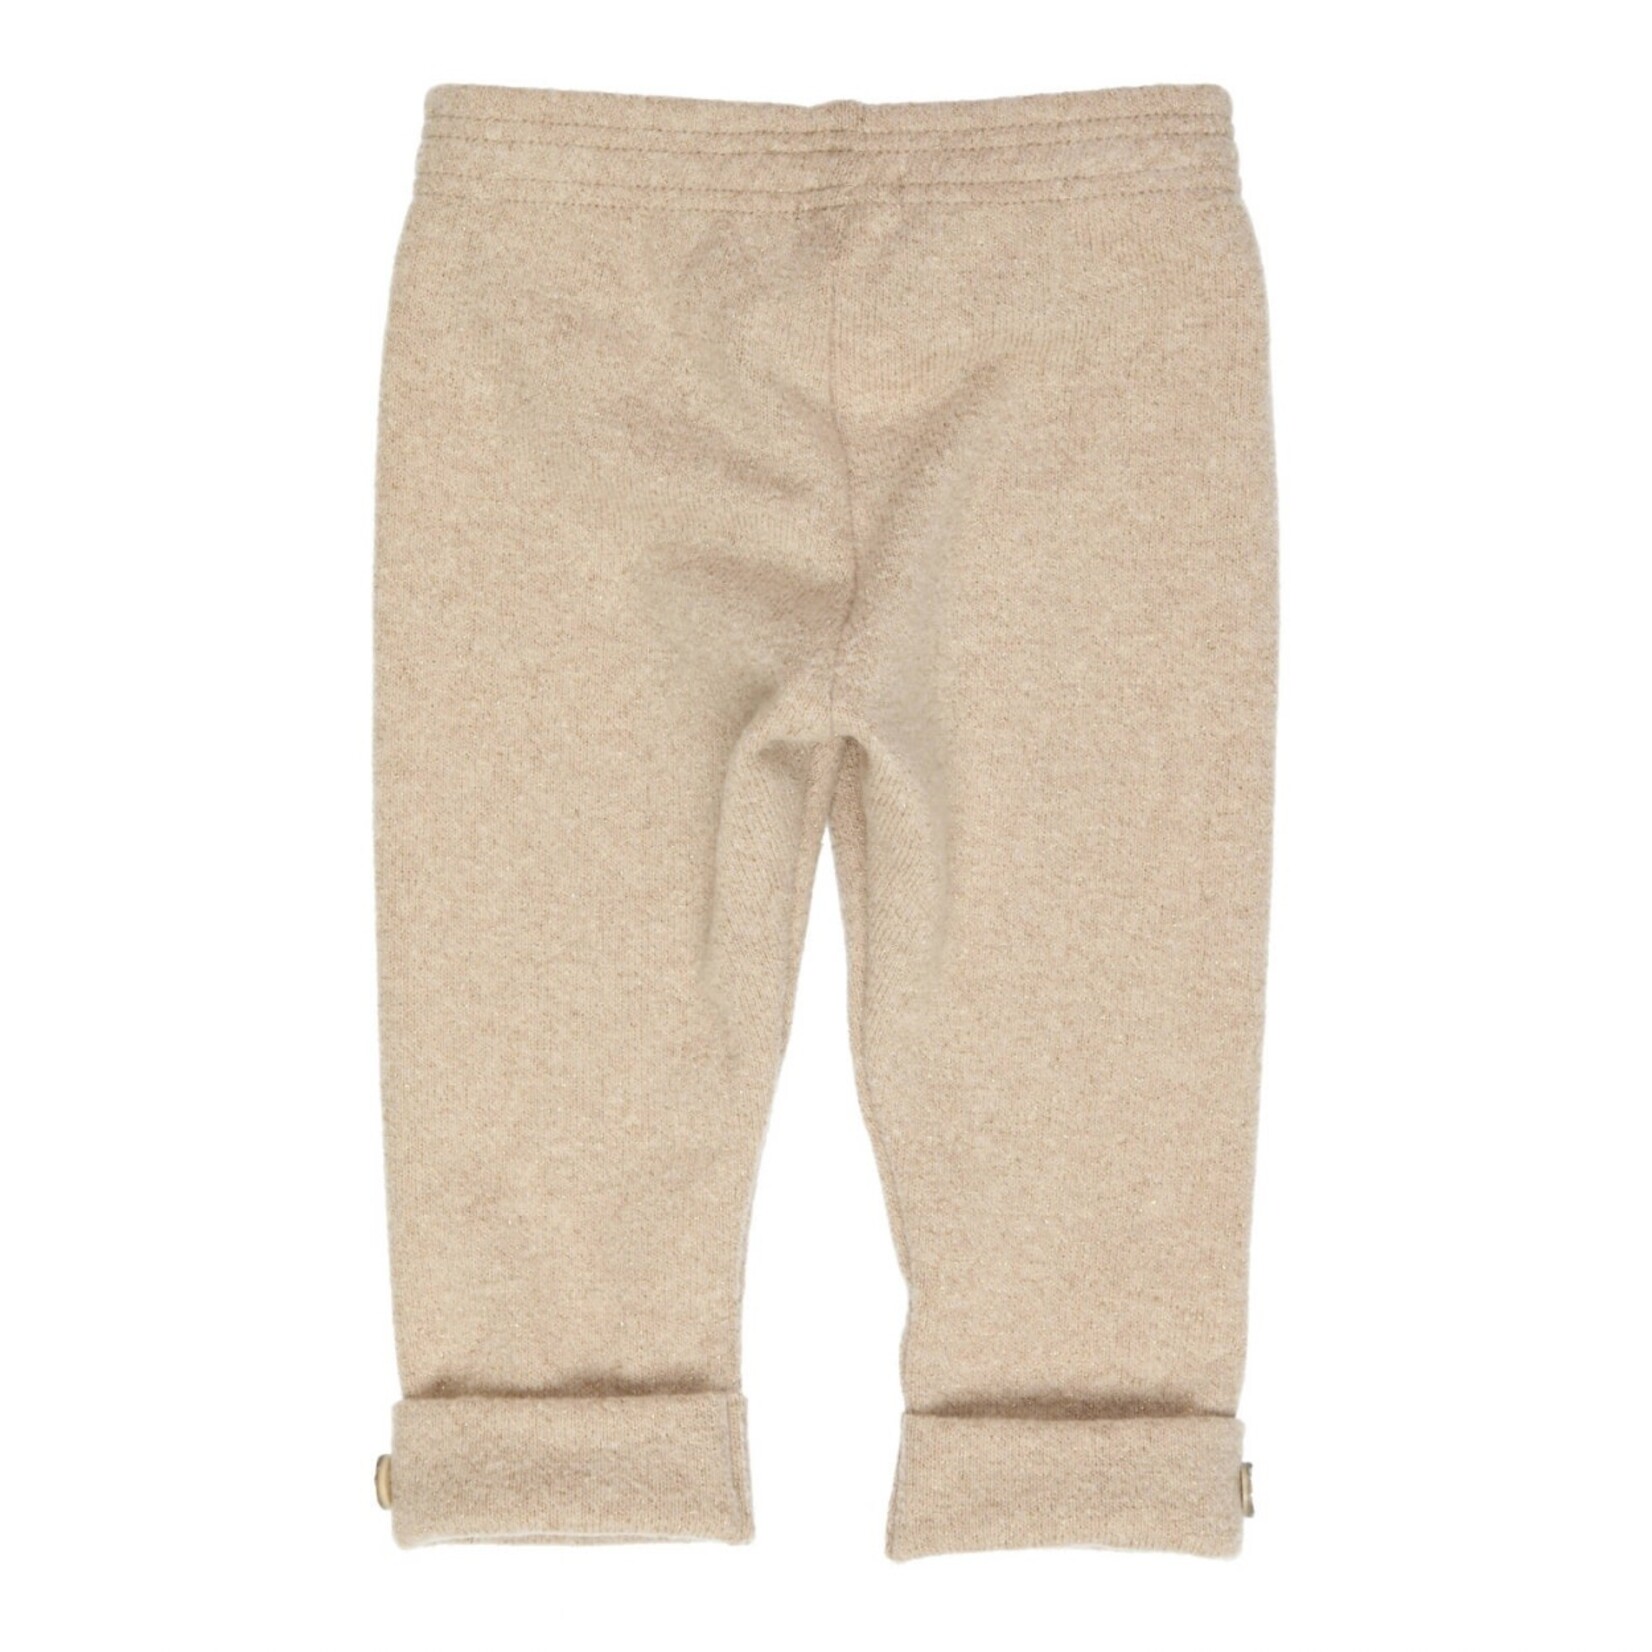 Gymp Trousers Lucia_Beige